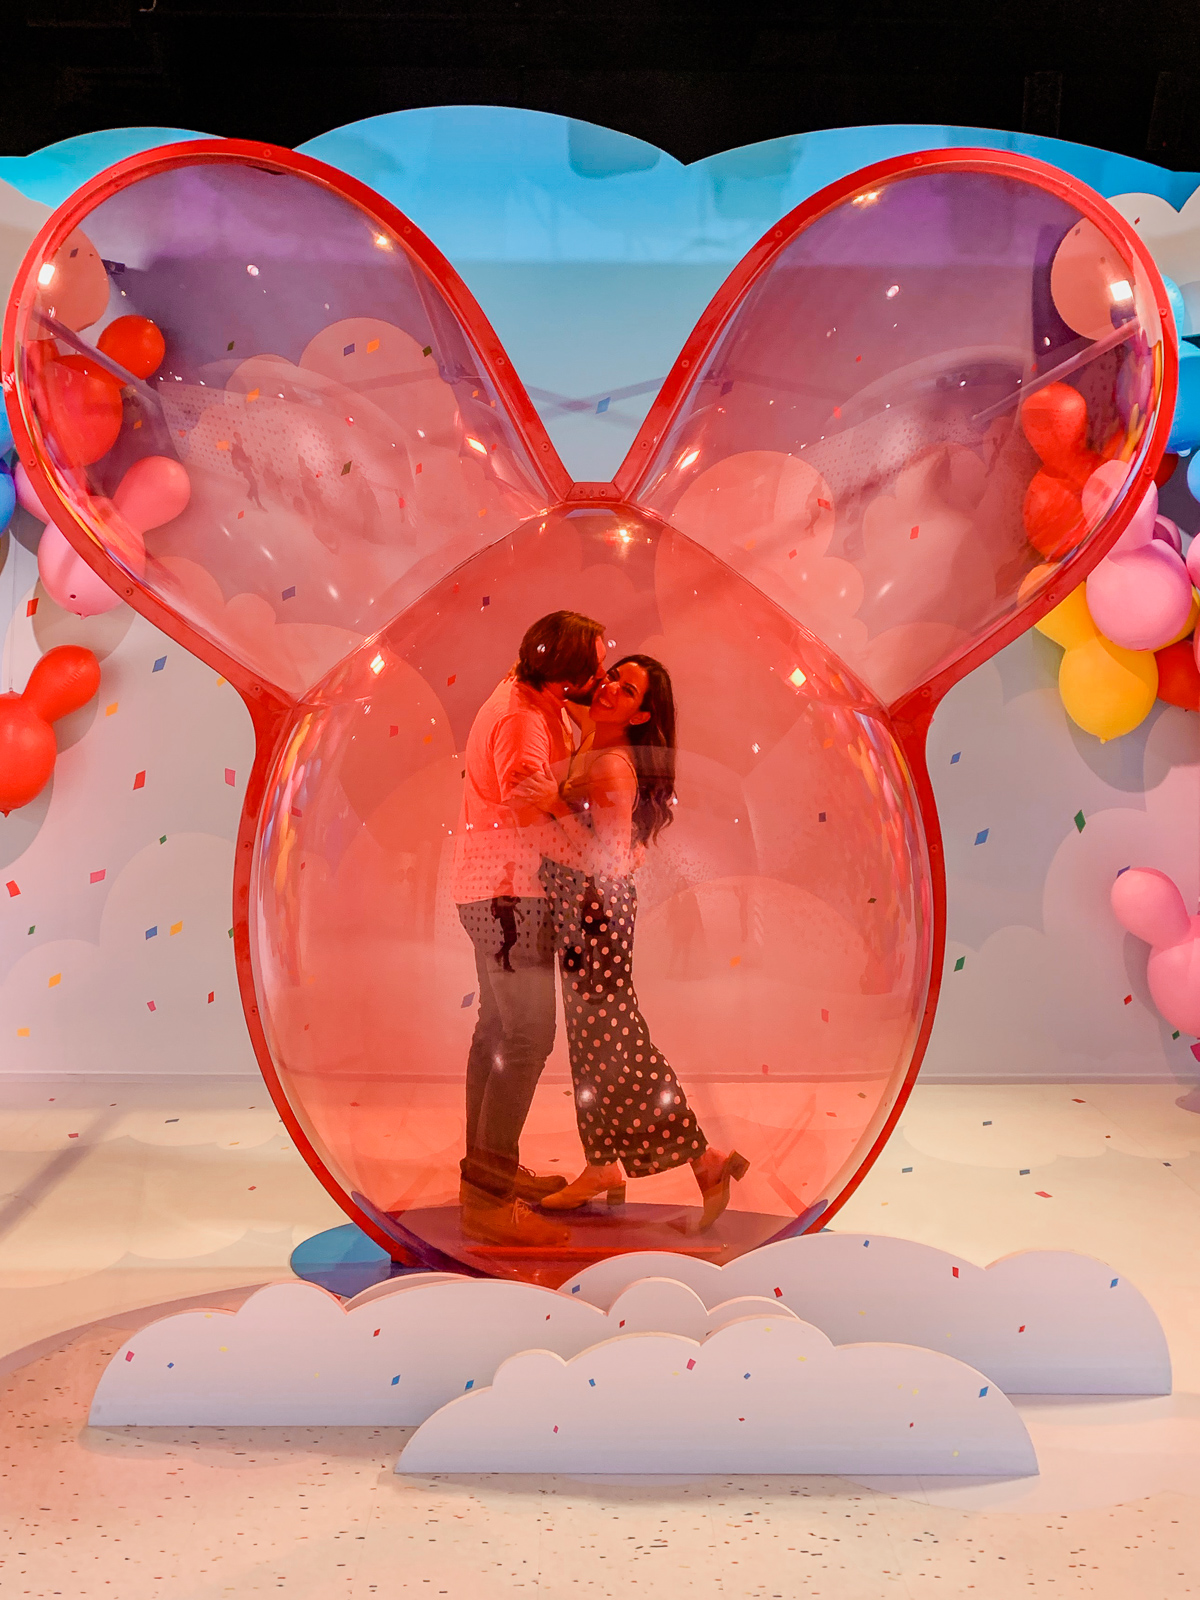 We visited the Pop-Up Disney! Mickey Celebration at the Disneyland Resort and it did not dissapoint! With plenty of photo-ops this cute walkthrough is a must!